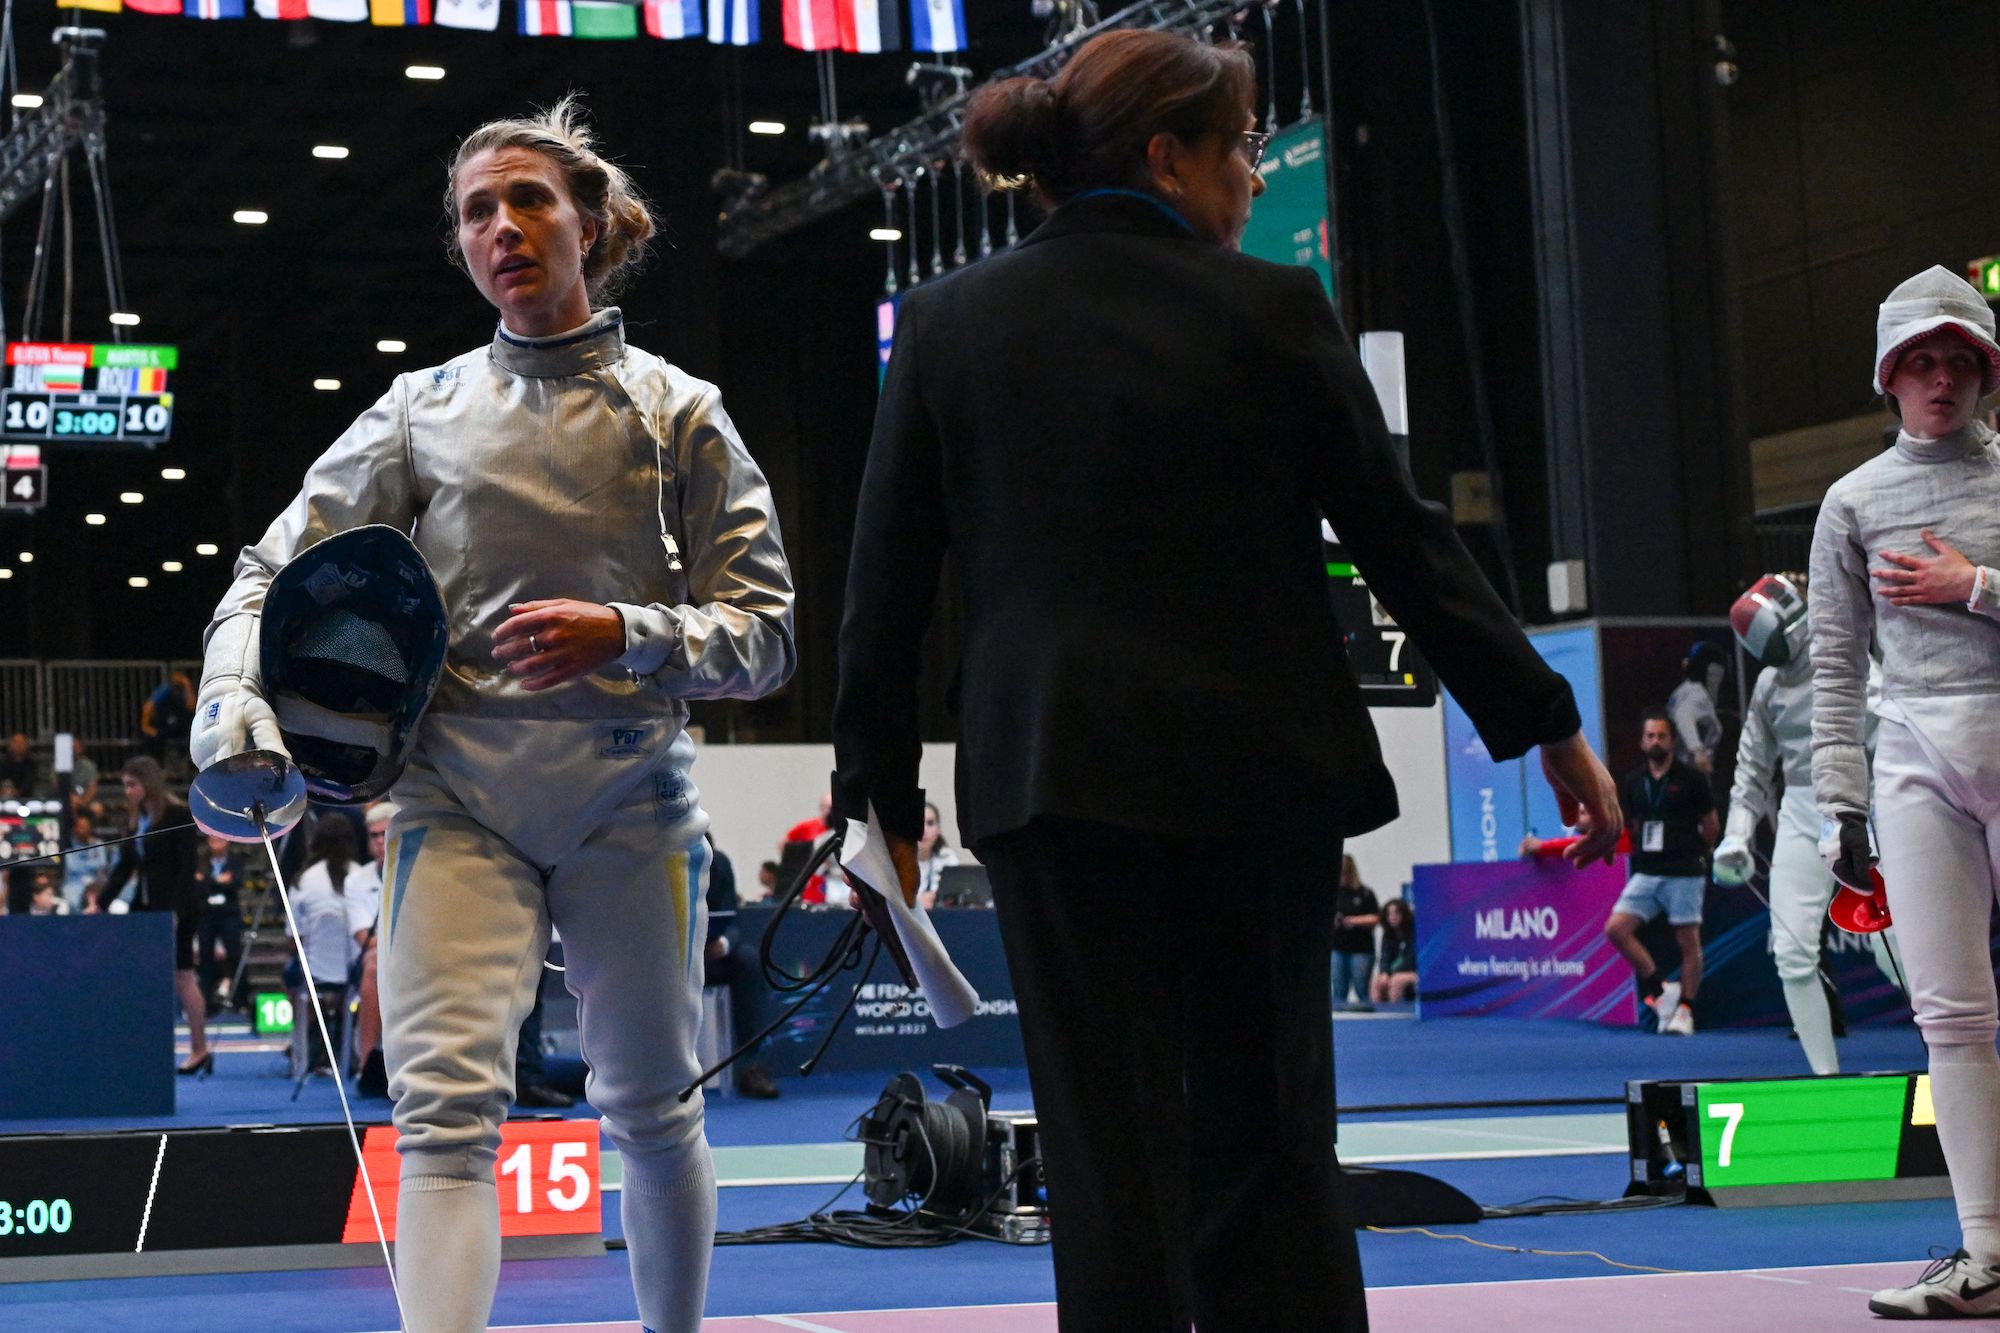 Ukraine's Olga Kharlan, left, leaves the fencing strip after she refused to shake hands with Russia's Anna Smirnova during the Fencing World Championships in Milan, on Thursday, July 27, 2023.